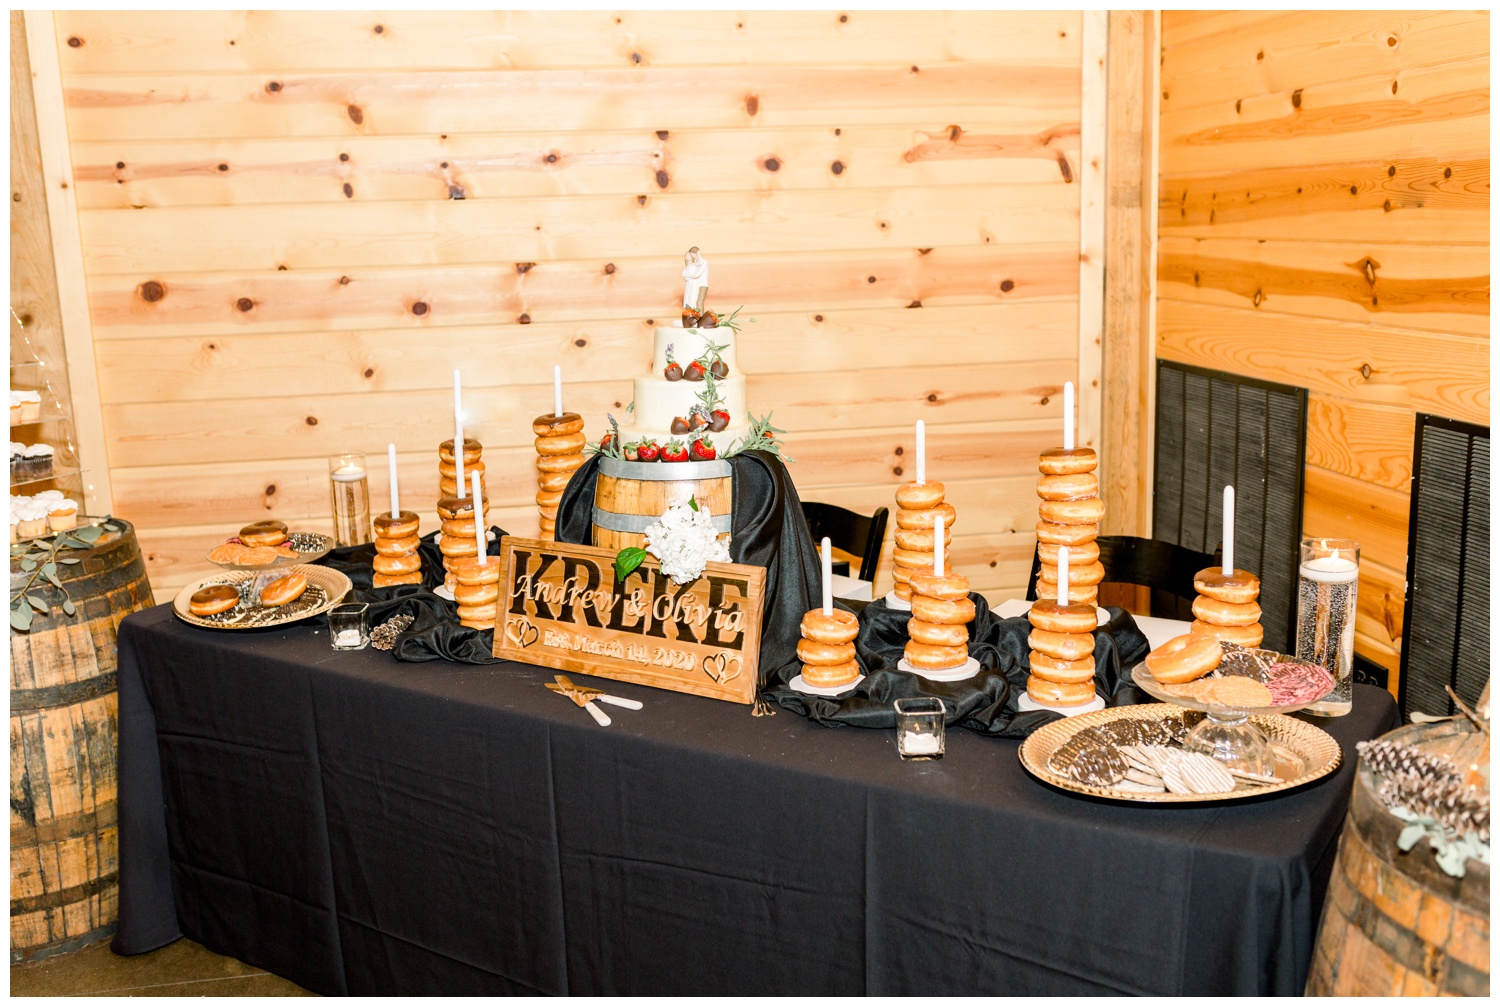 Cake Table - Wedding Dessert Spread - Cake and Donuts